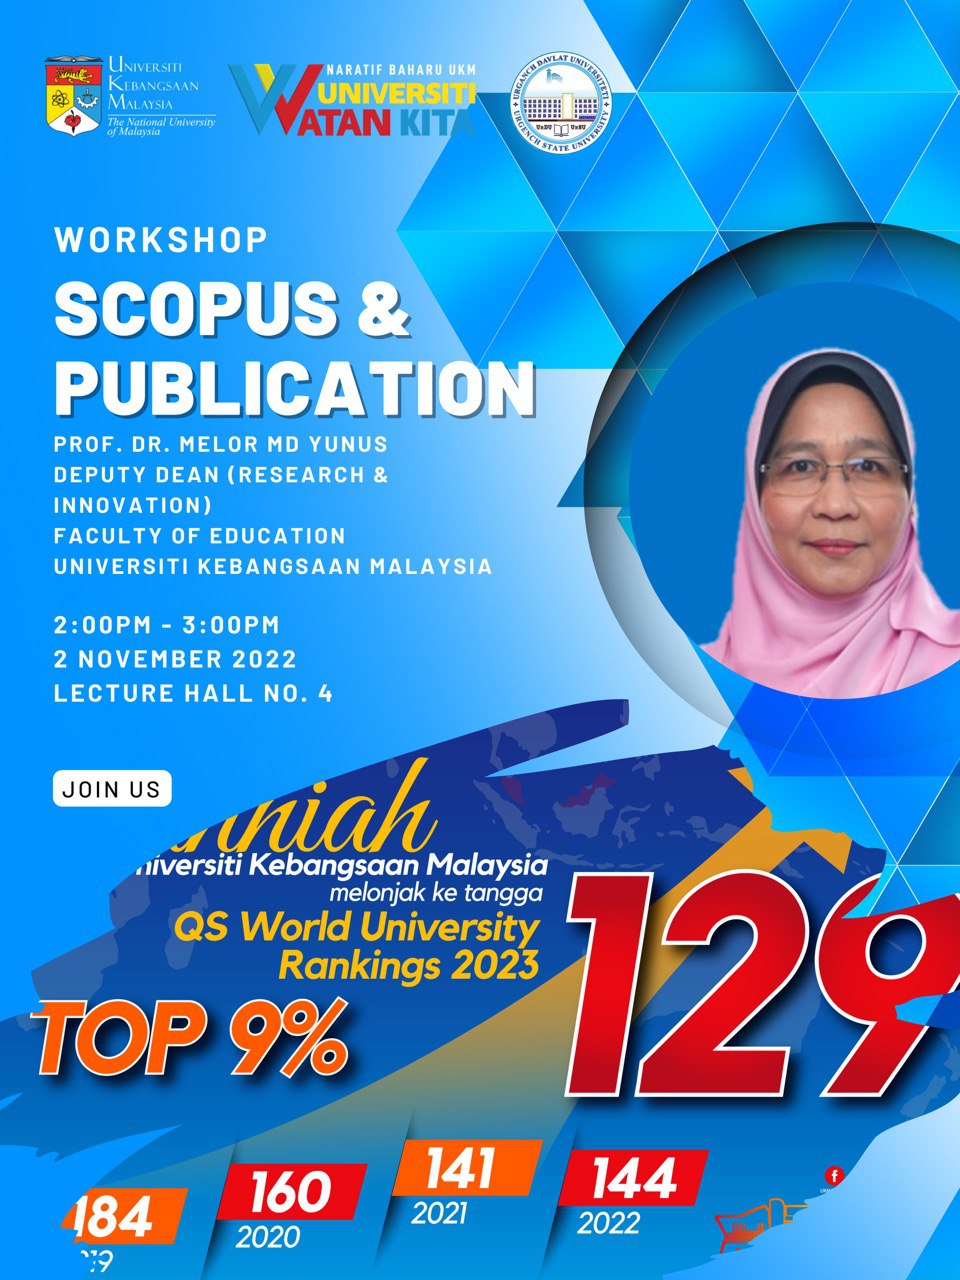 Malaysian professor Dr. Melor MD Yunus - a workshop on publishing articles in Scopus journals was held